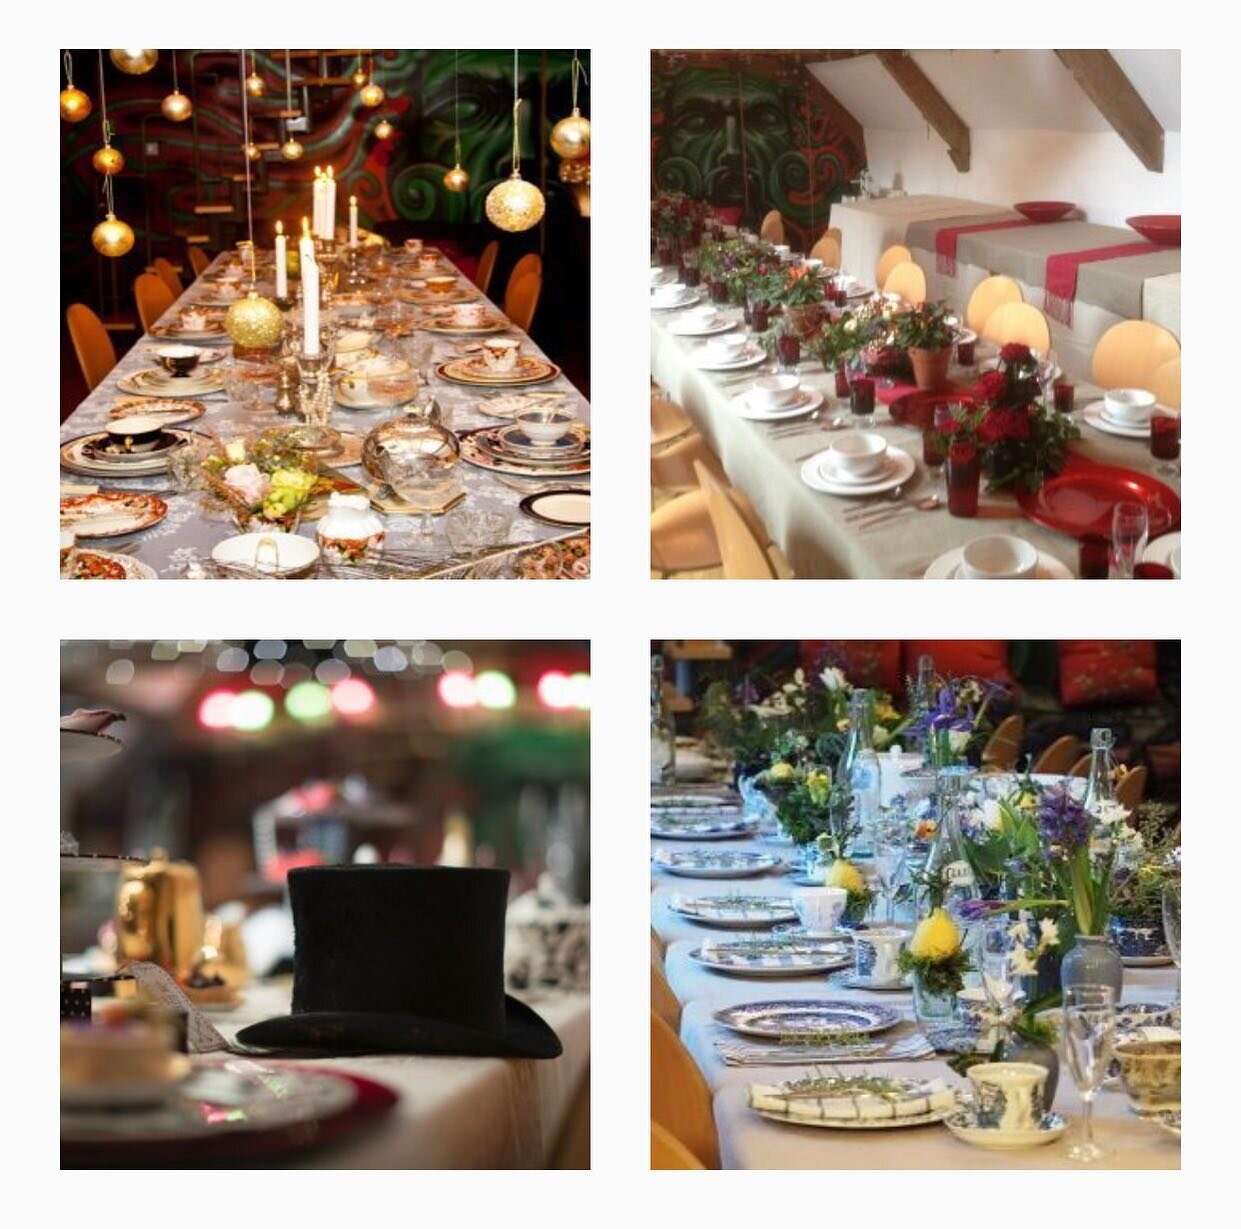 Bordello Banquets is based between Bristol and the Forest of Dean and in between. The emphasis is on display and styling, creating wow factor tables, using local, organic and artisan products whenever possible. 

Bordello Banquets caters predominantl